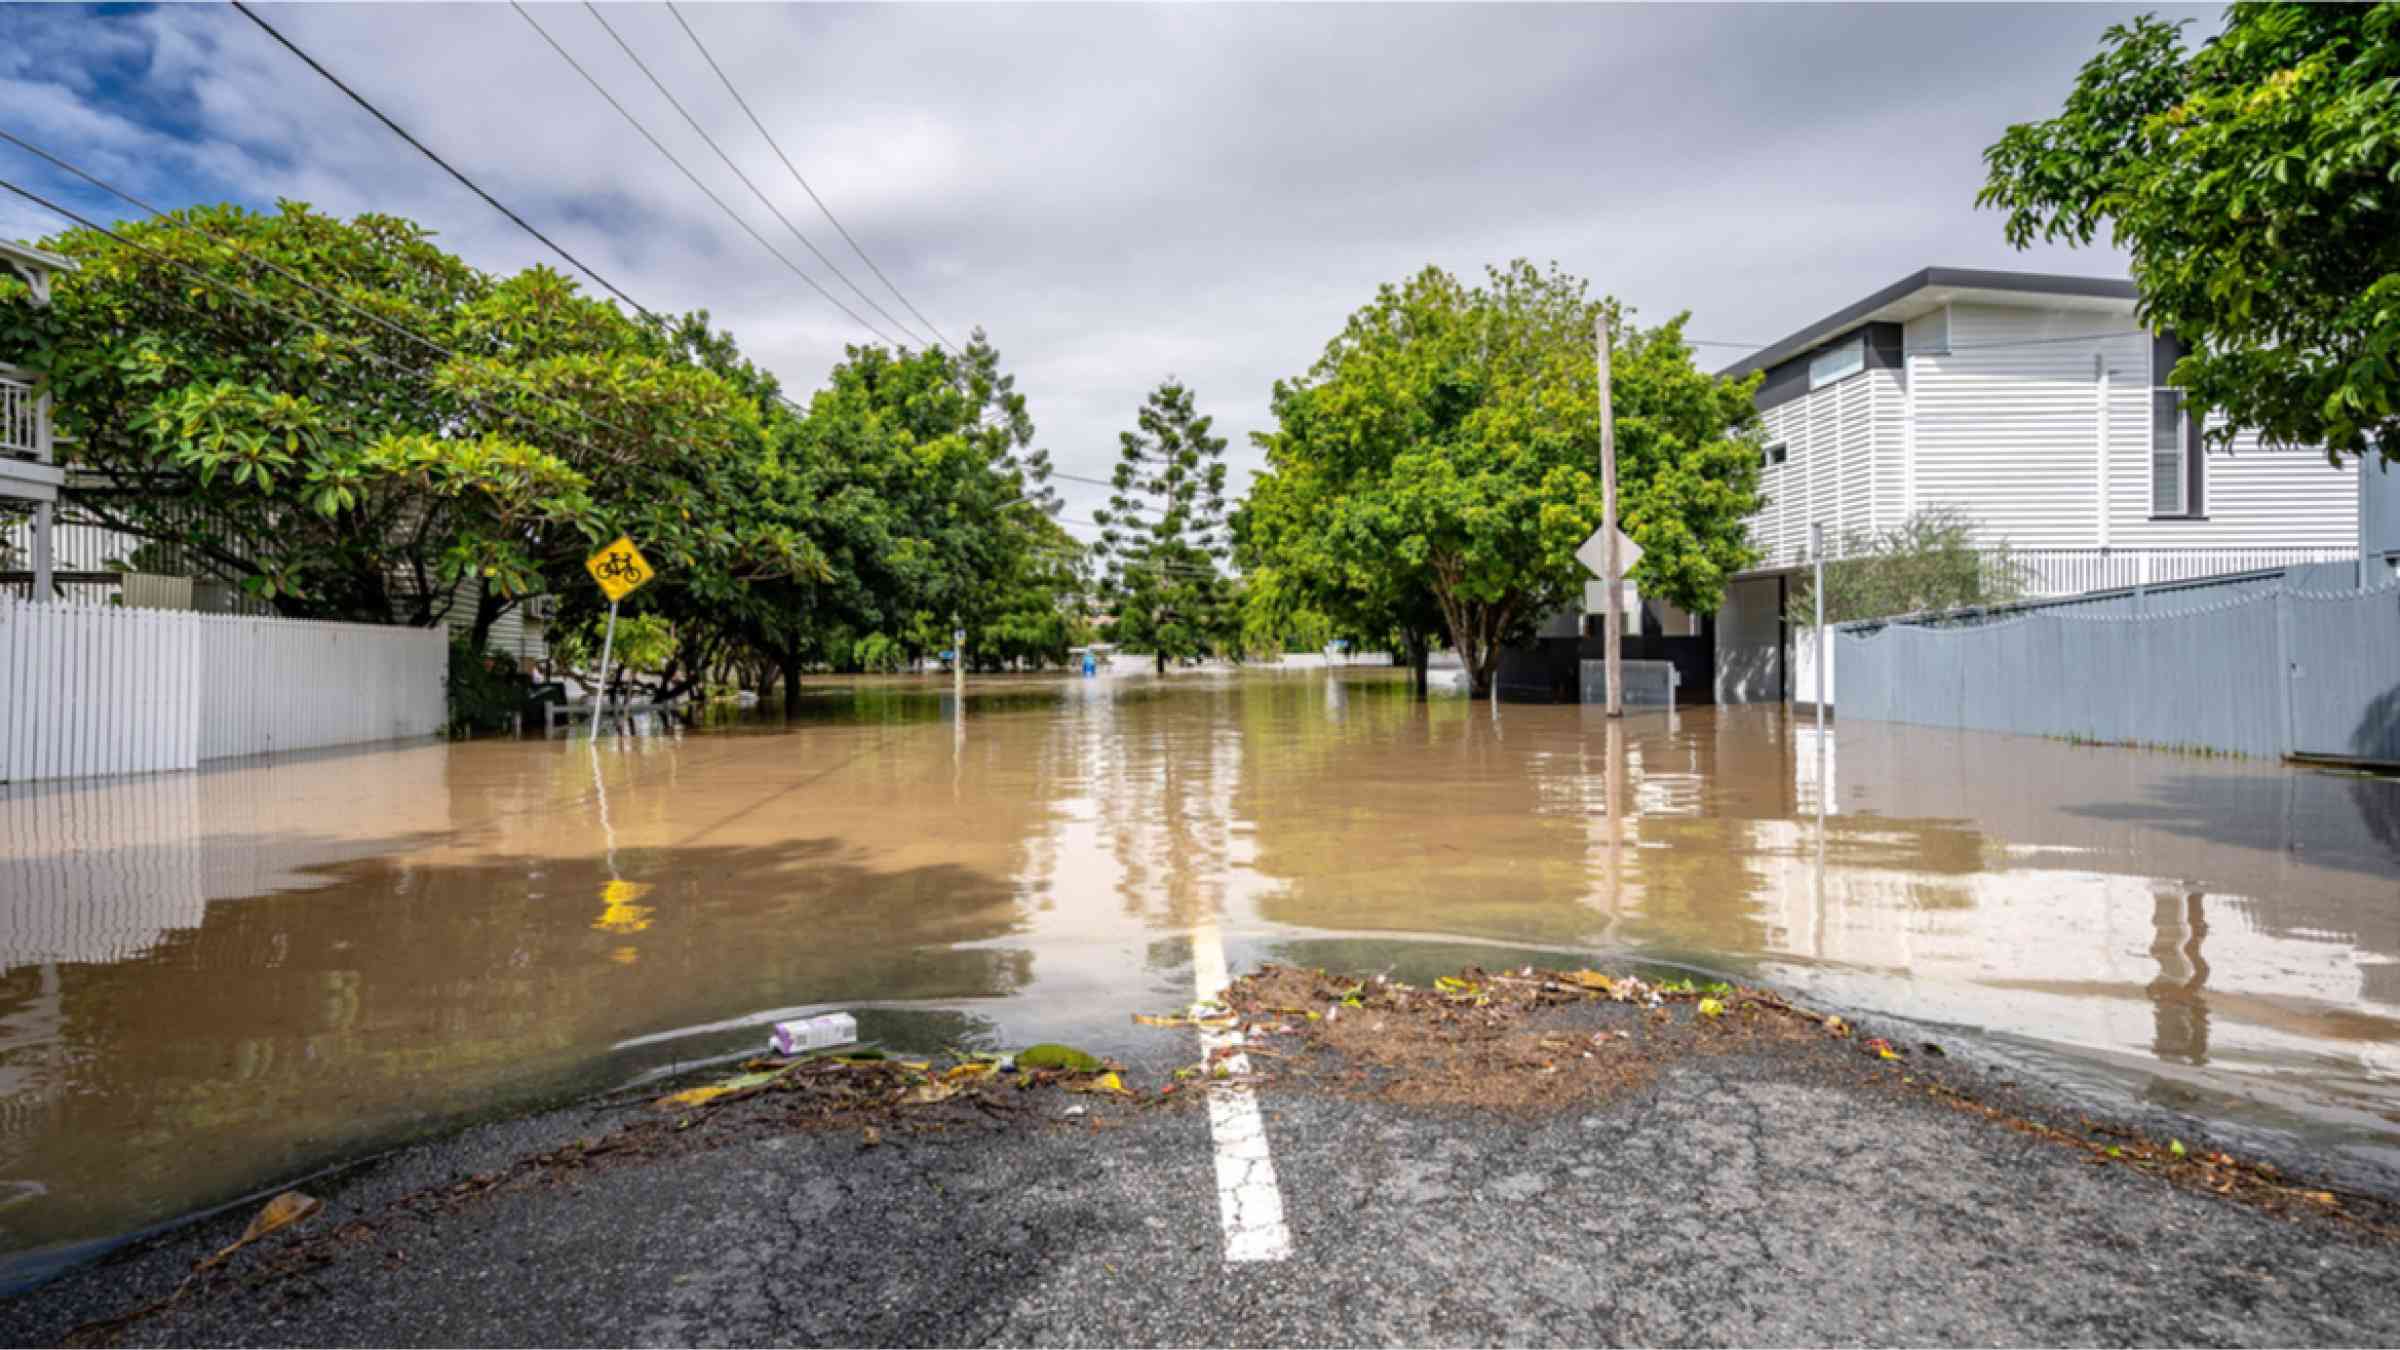 Flooding in the streets of Brisbane on 28 February 2022.